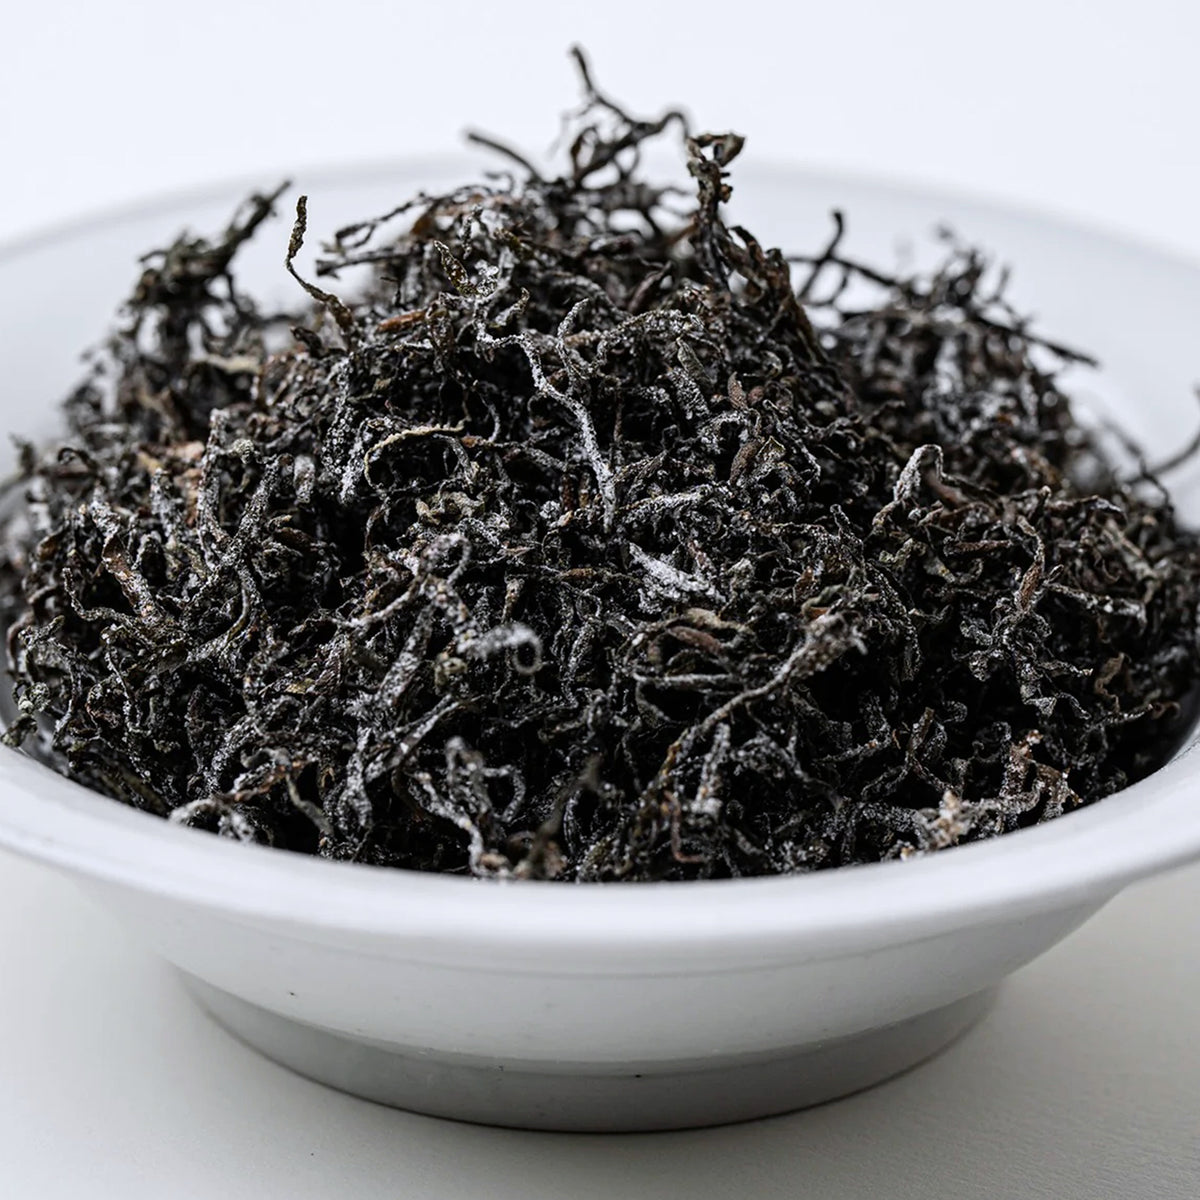 All-Natural Additive-Free Premium Dried "Hijiki" Seaweed from Japan (27g x 2)